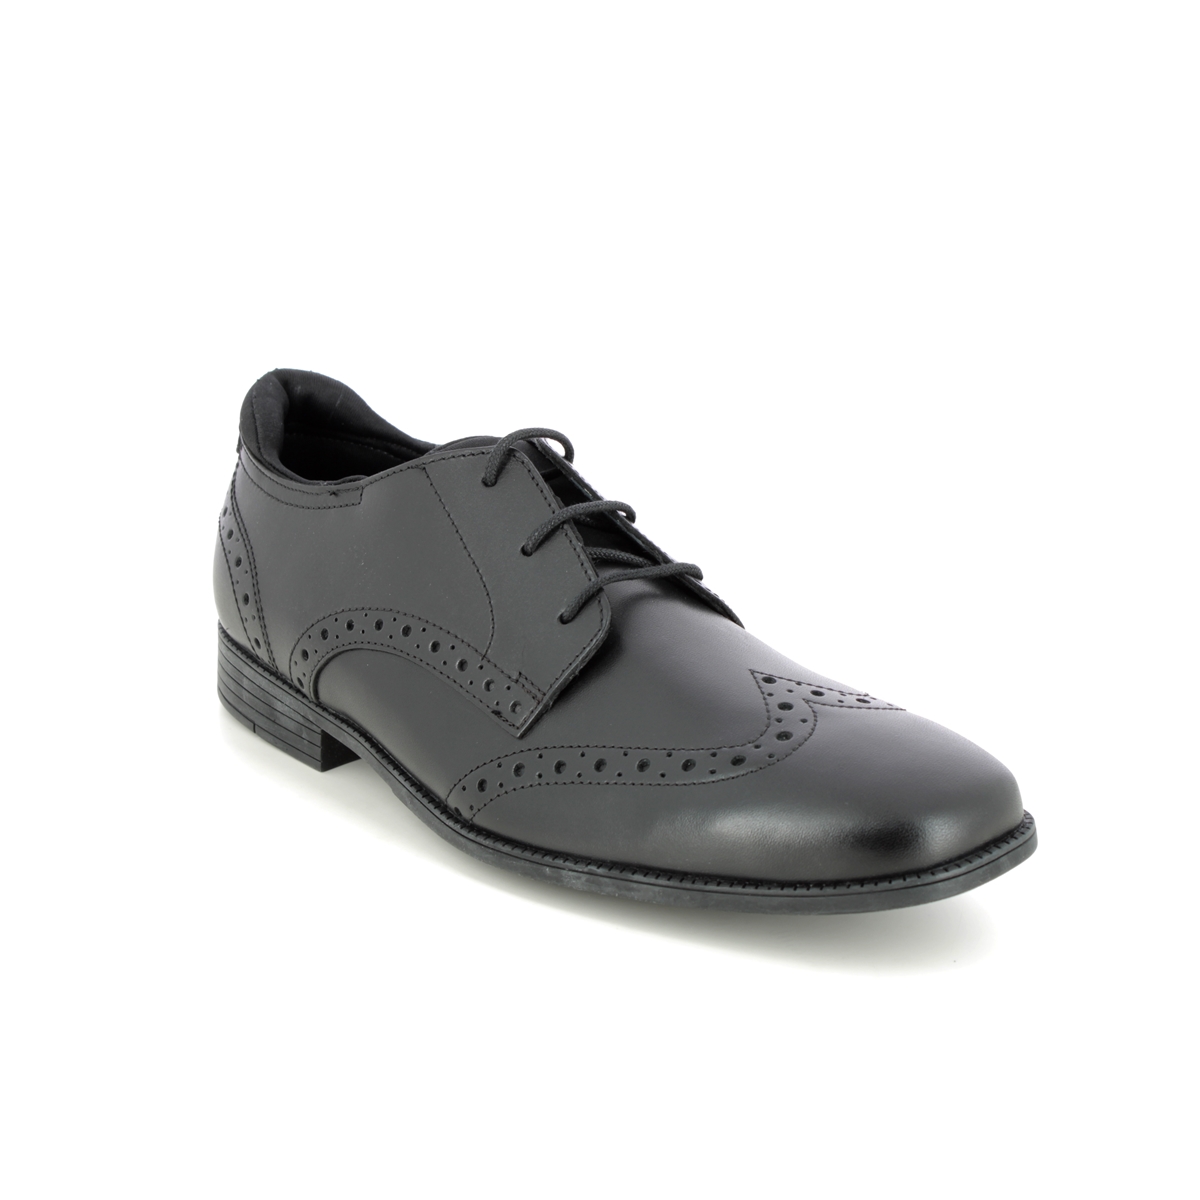 Start Rite - Tailor In Black Leather 2792-76F In Size 4 In Plain Black Leather For School Boys Shoes  In Black Leather For kids